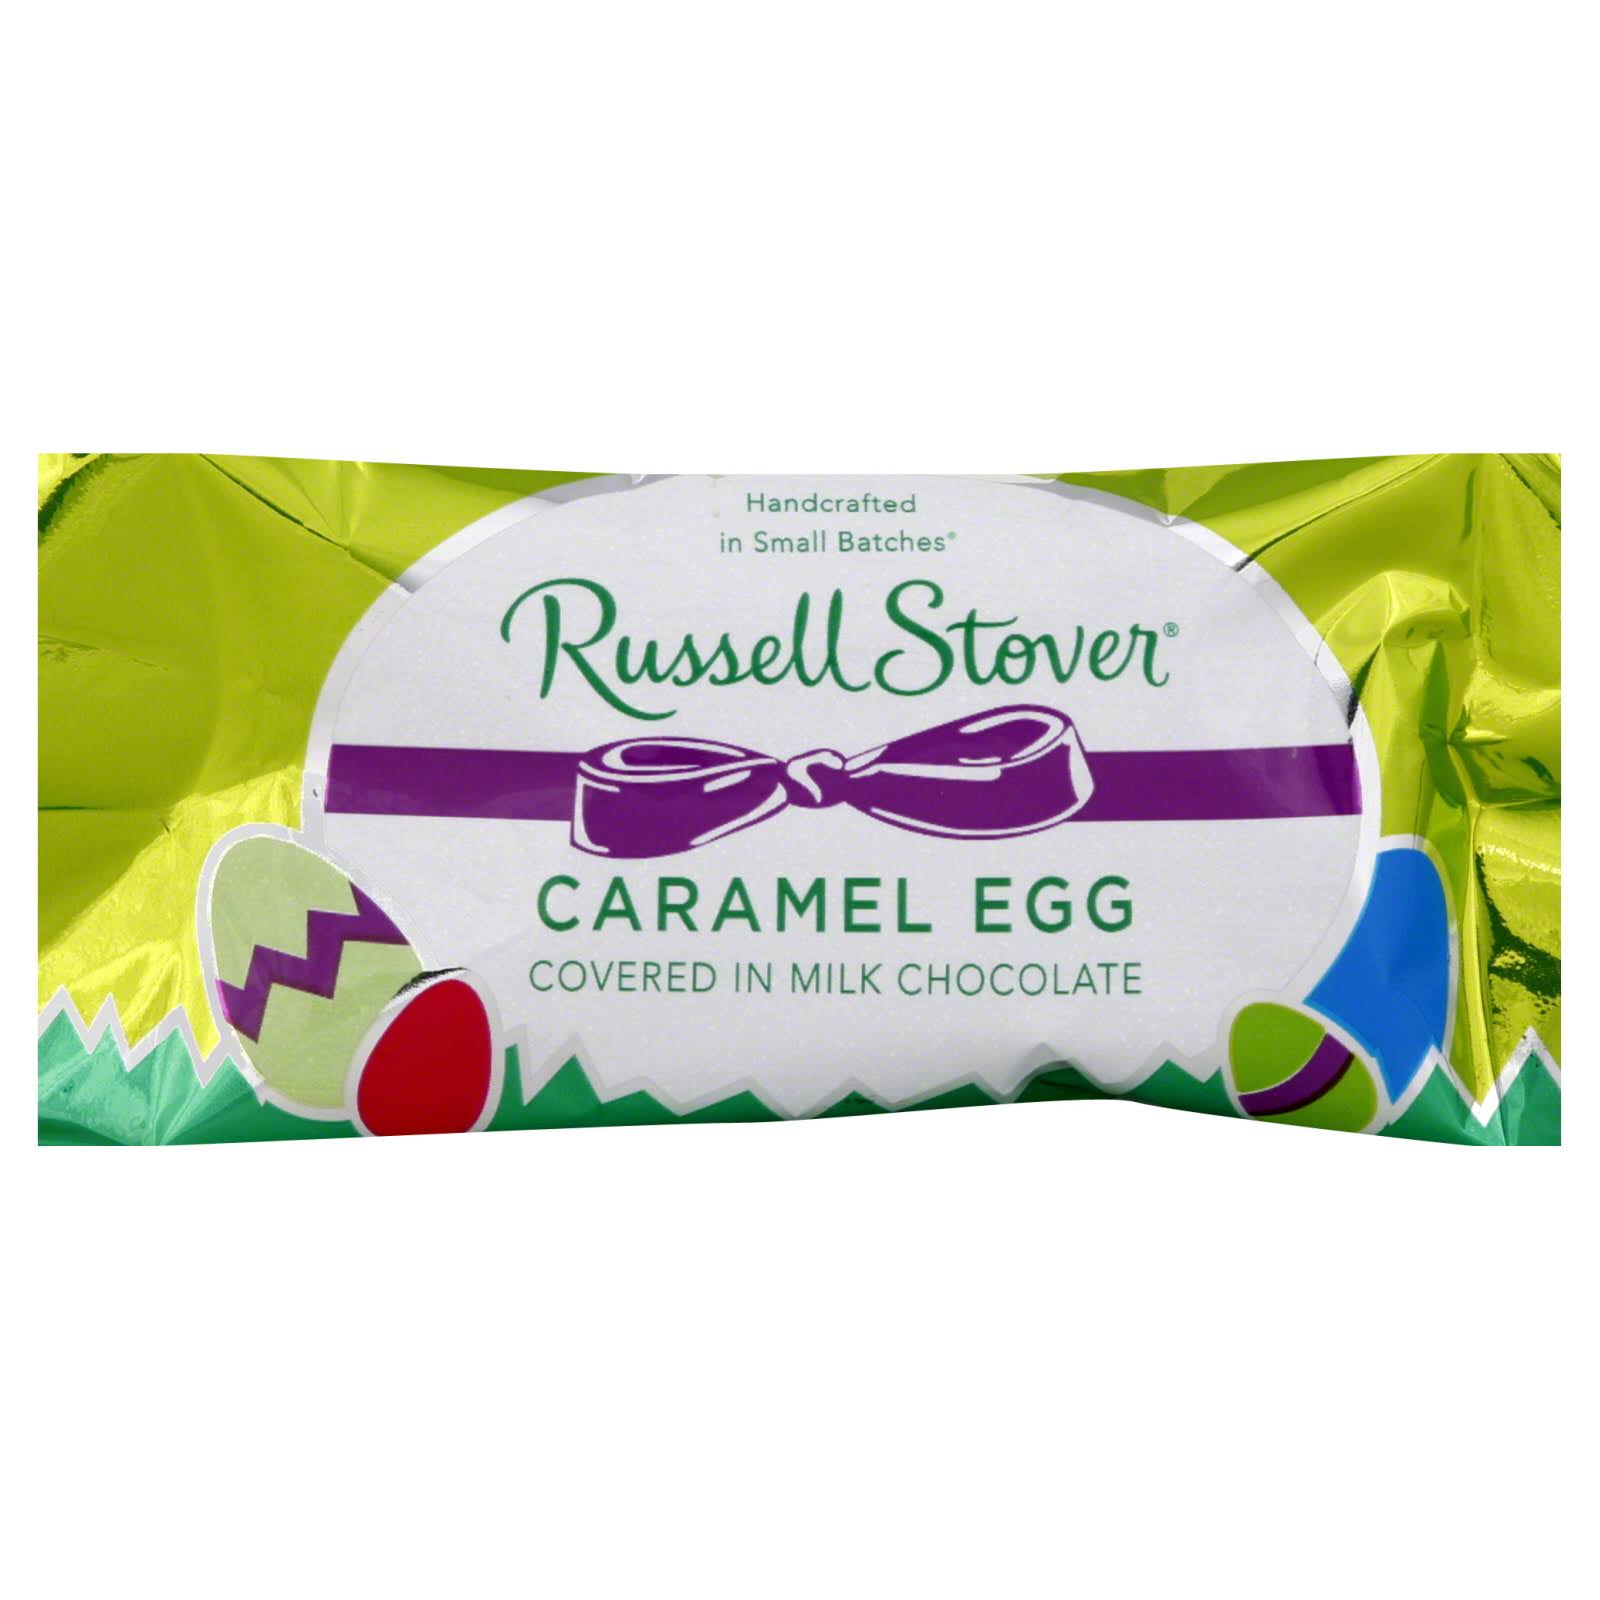 Russell Stover Caramel Egg Candy - Caramel, 1oz